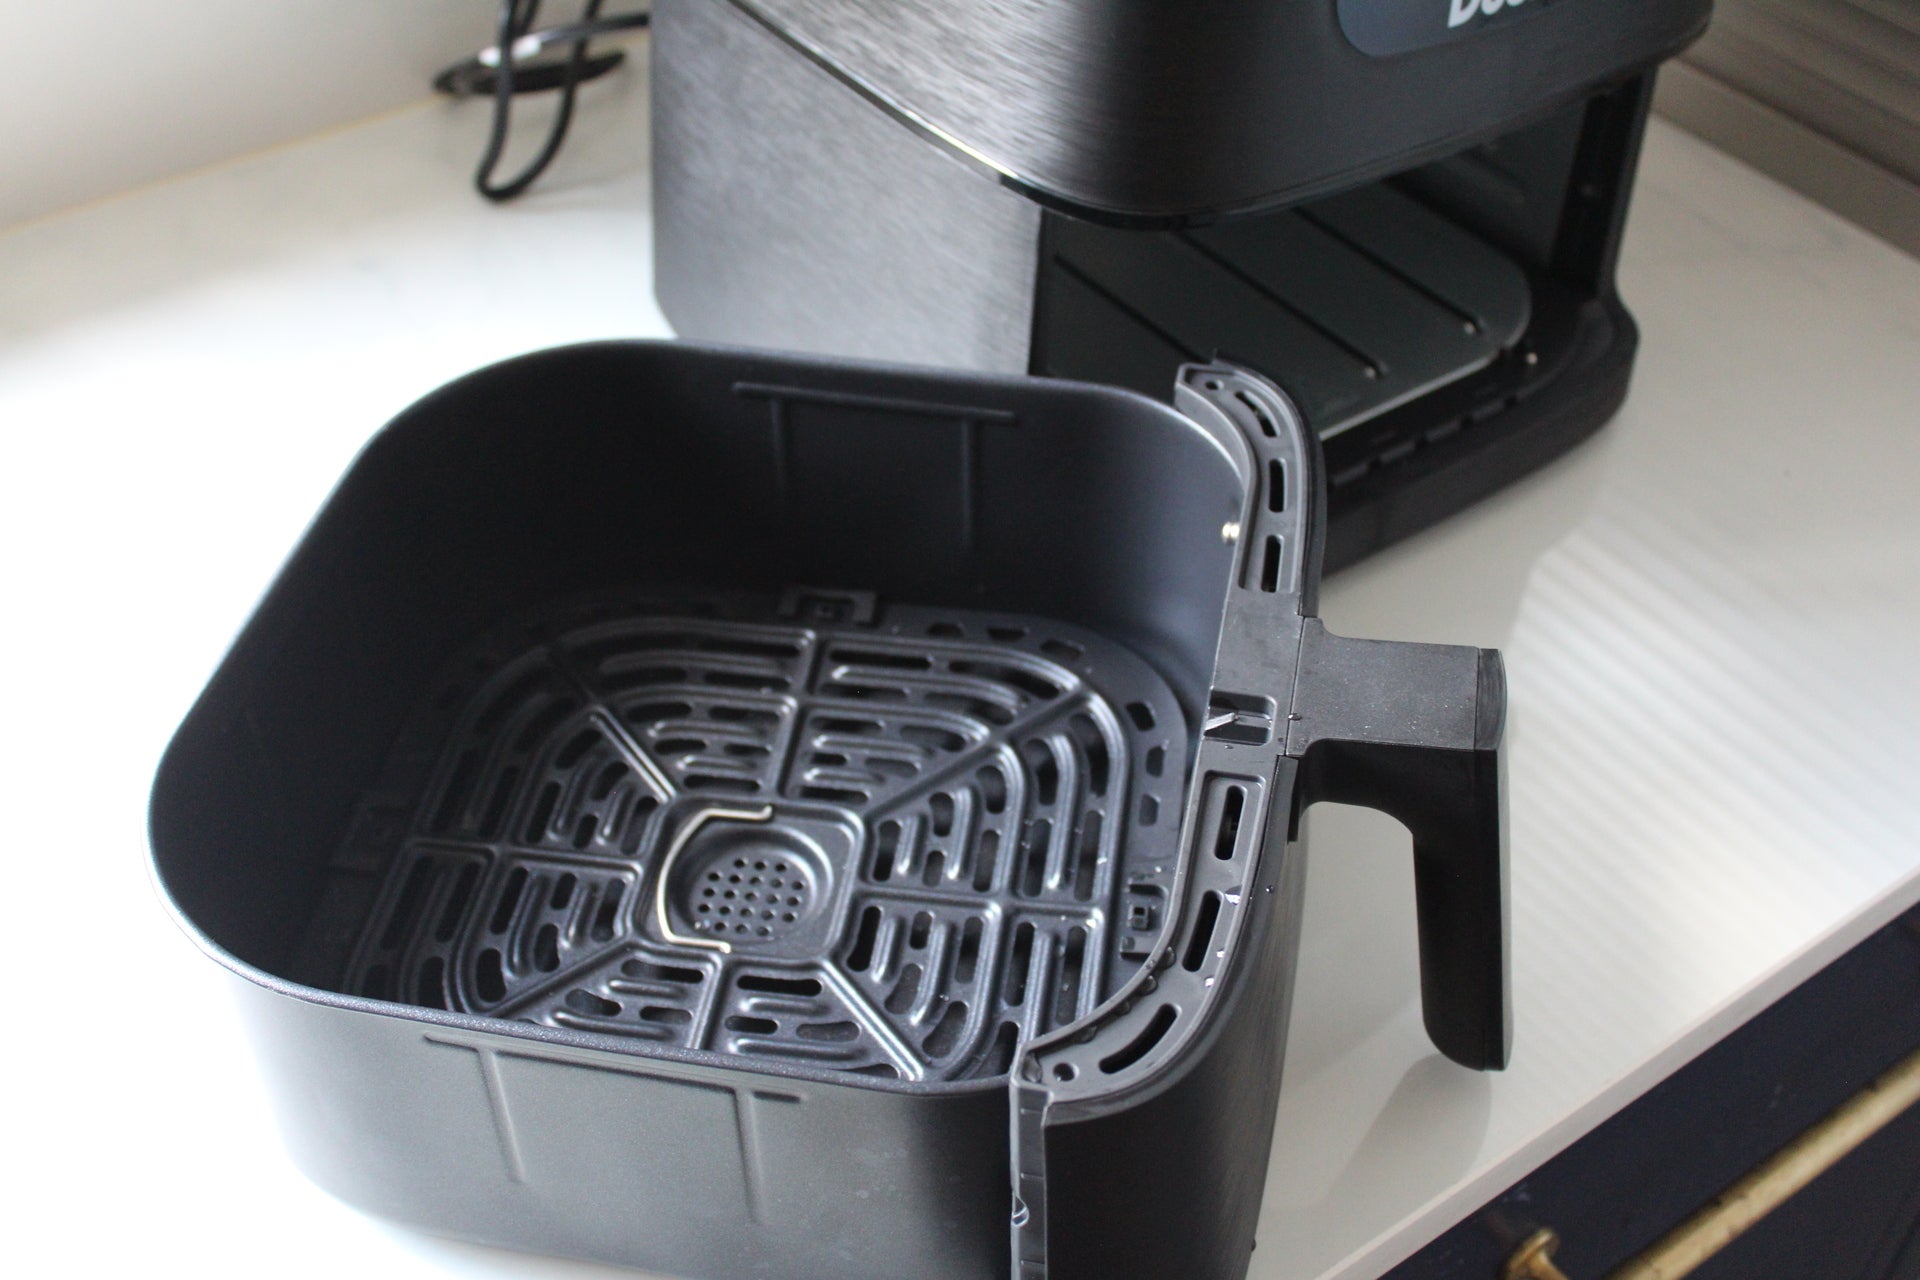 Dualit Air Fryer drawer and crisper plate